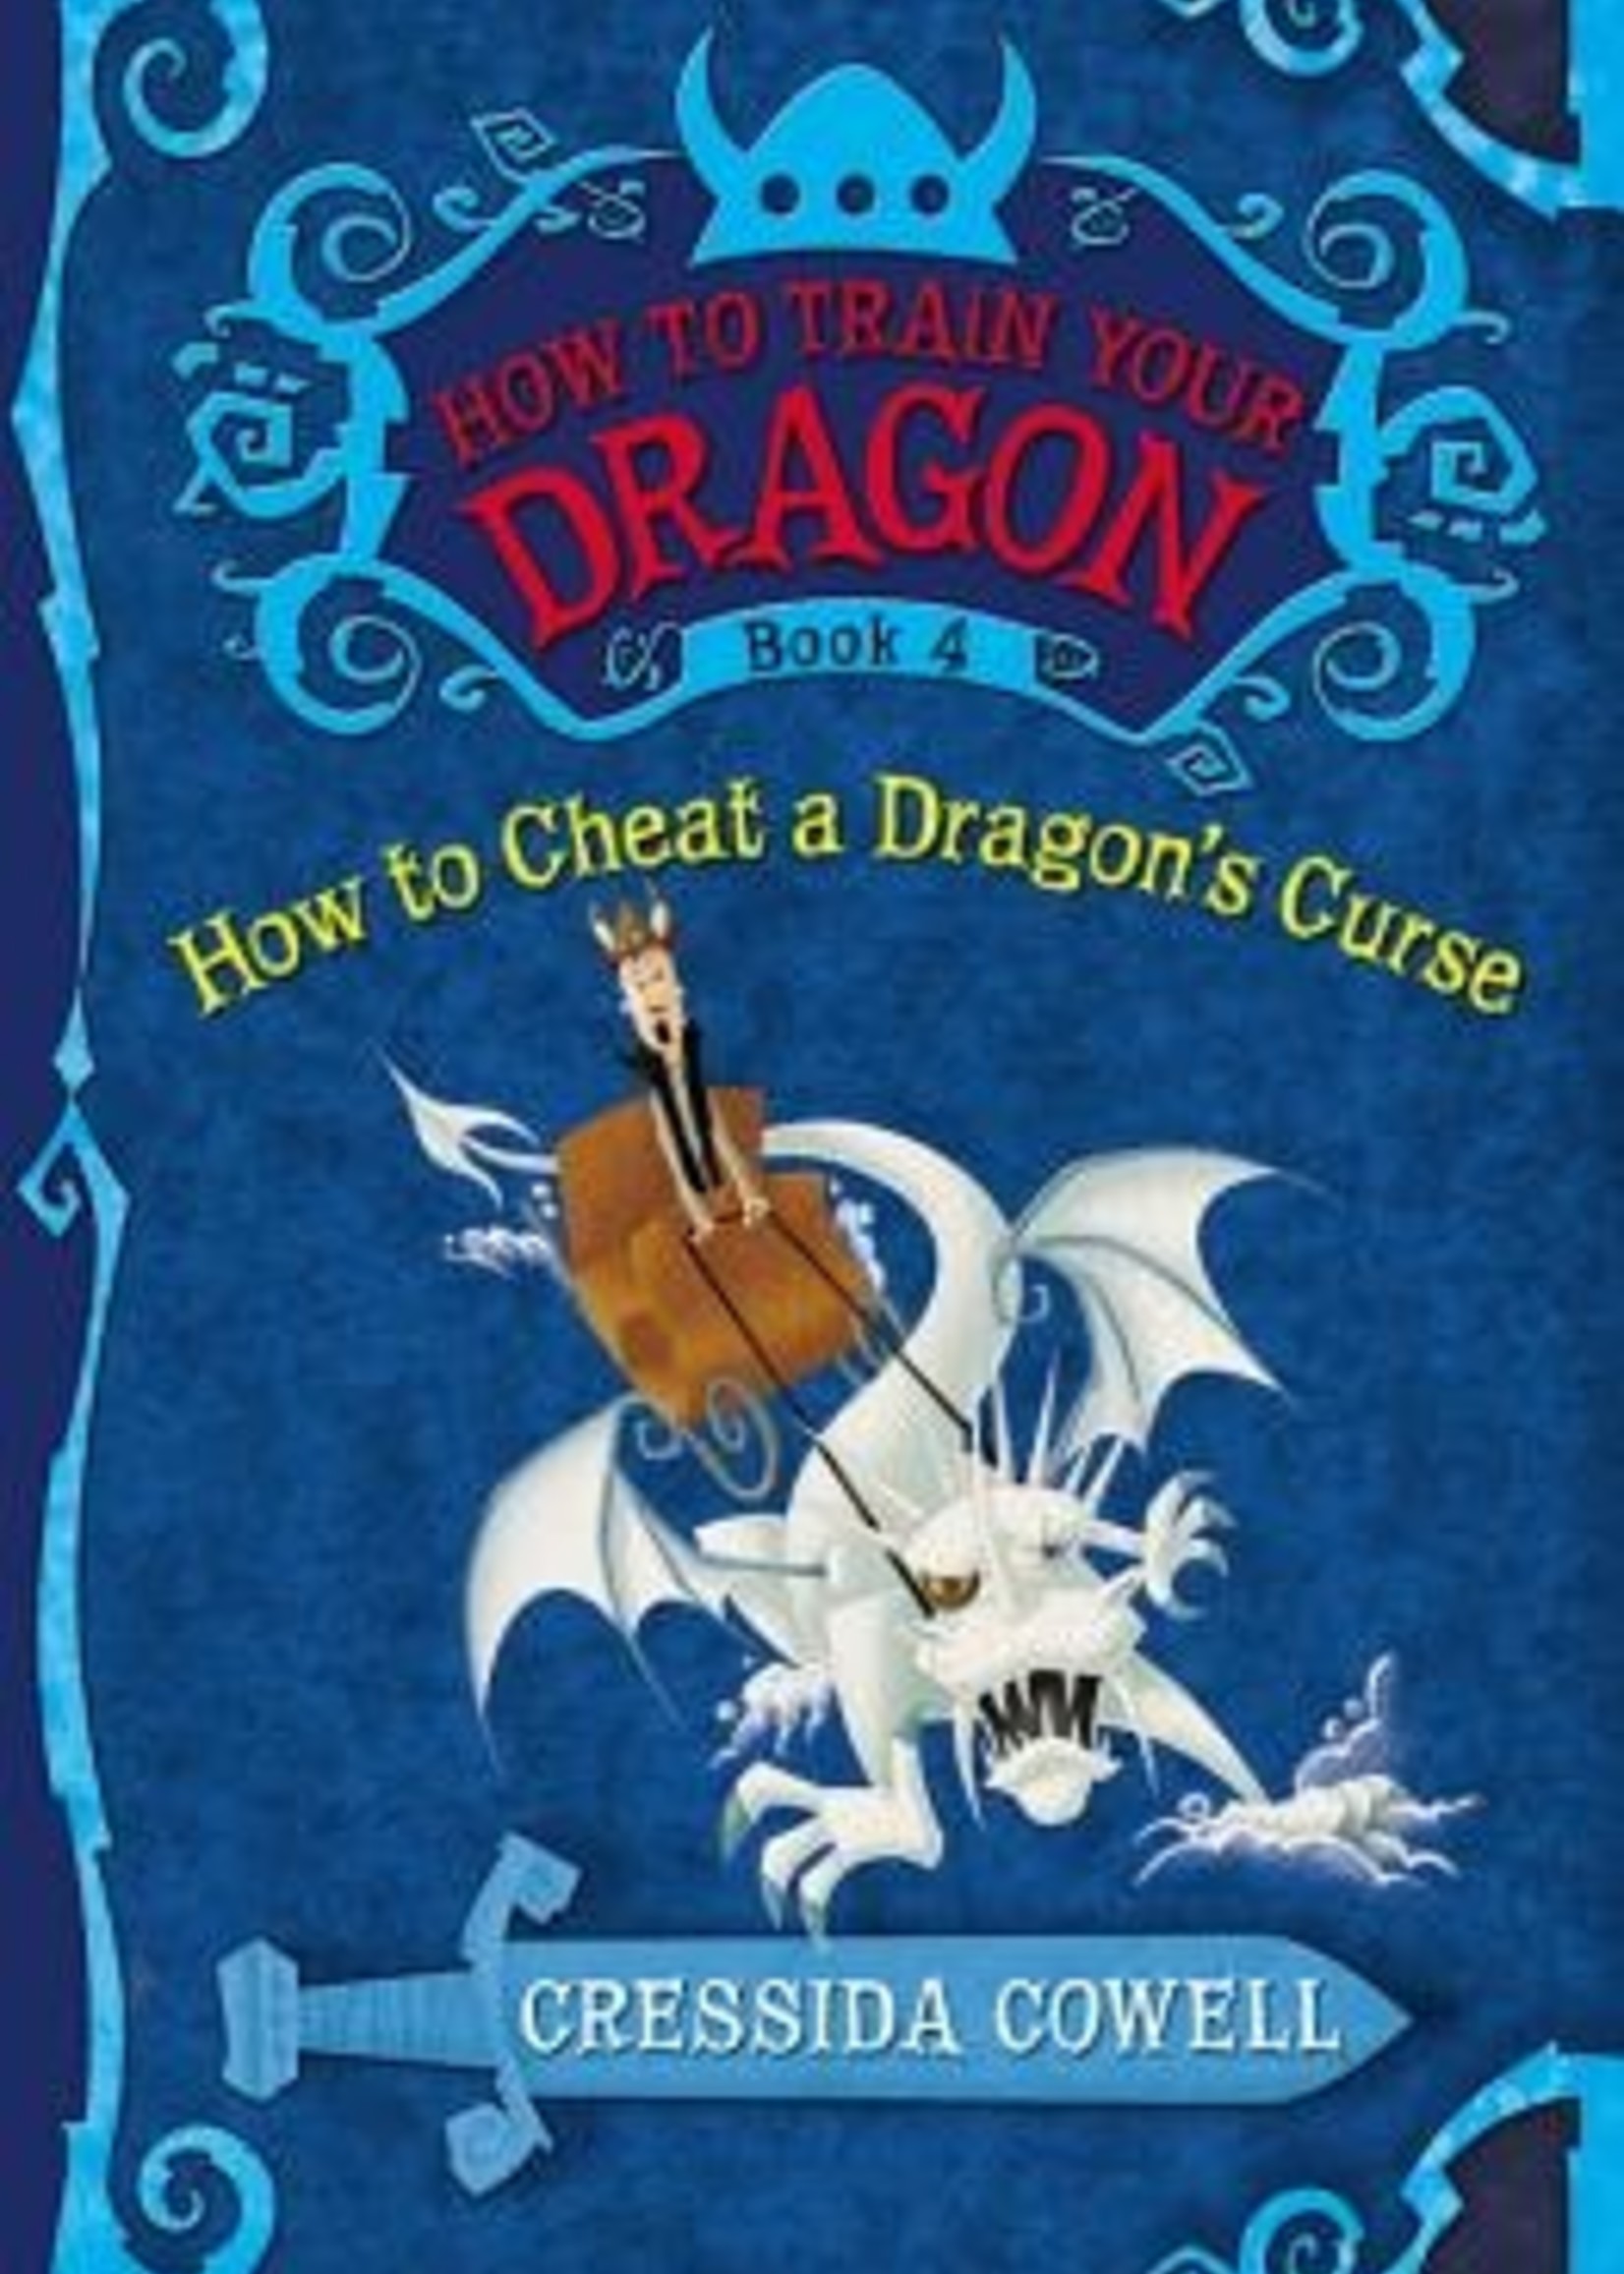 How to Train Your Dragon #04, How to Cheat a Dragon's Curse - Paperback